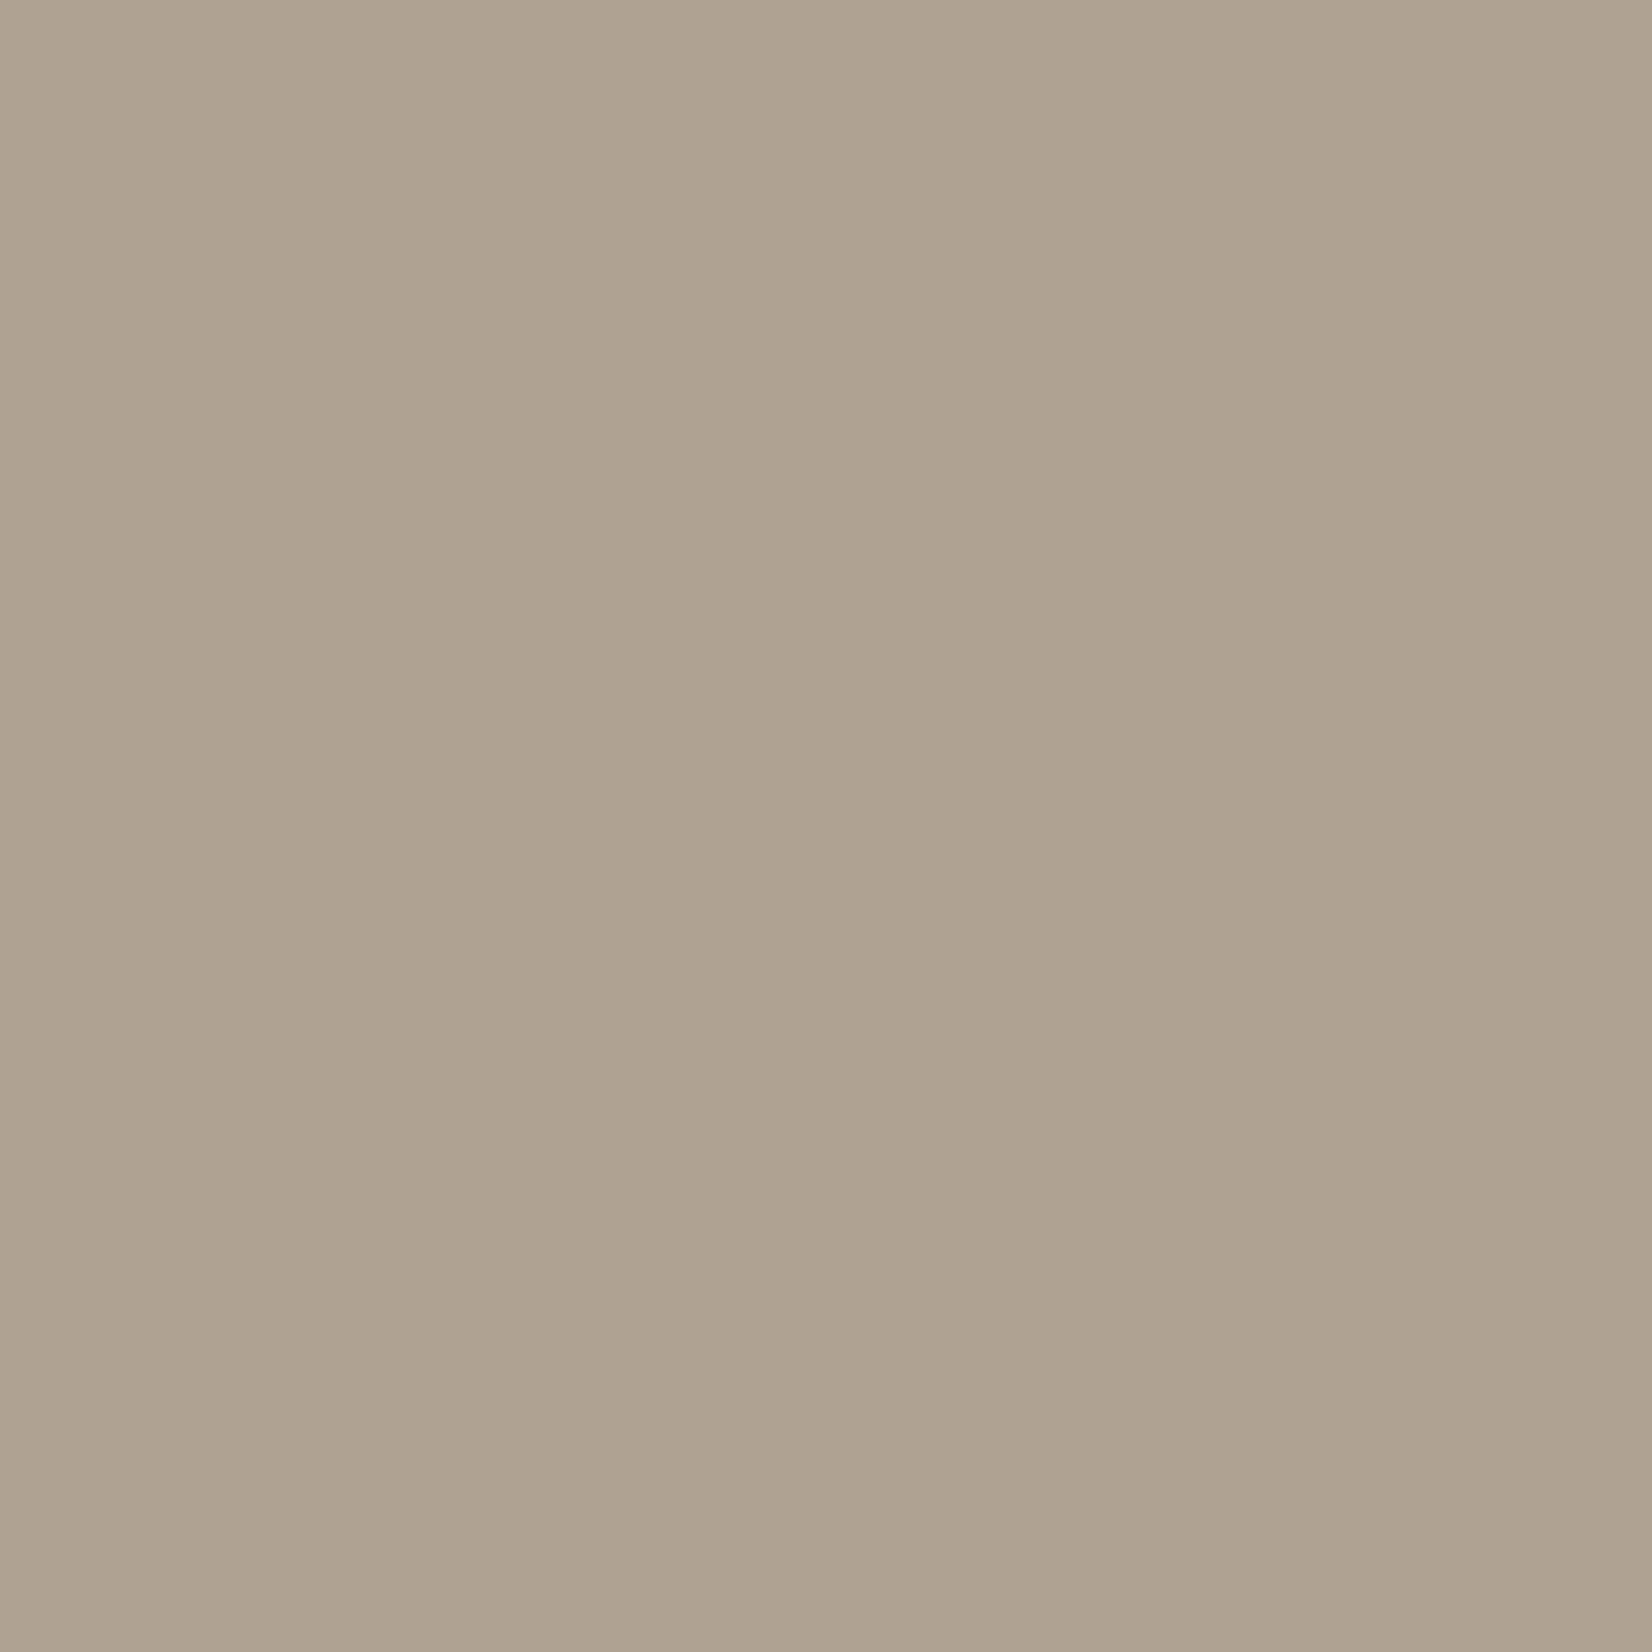 PRISMACOLOR CHISEL MARKER PM160 FRENCH GRAY 60% (FINAL SALE) (TBD)